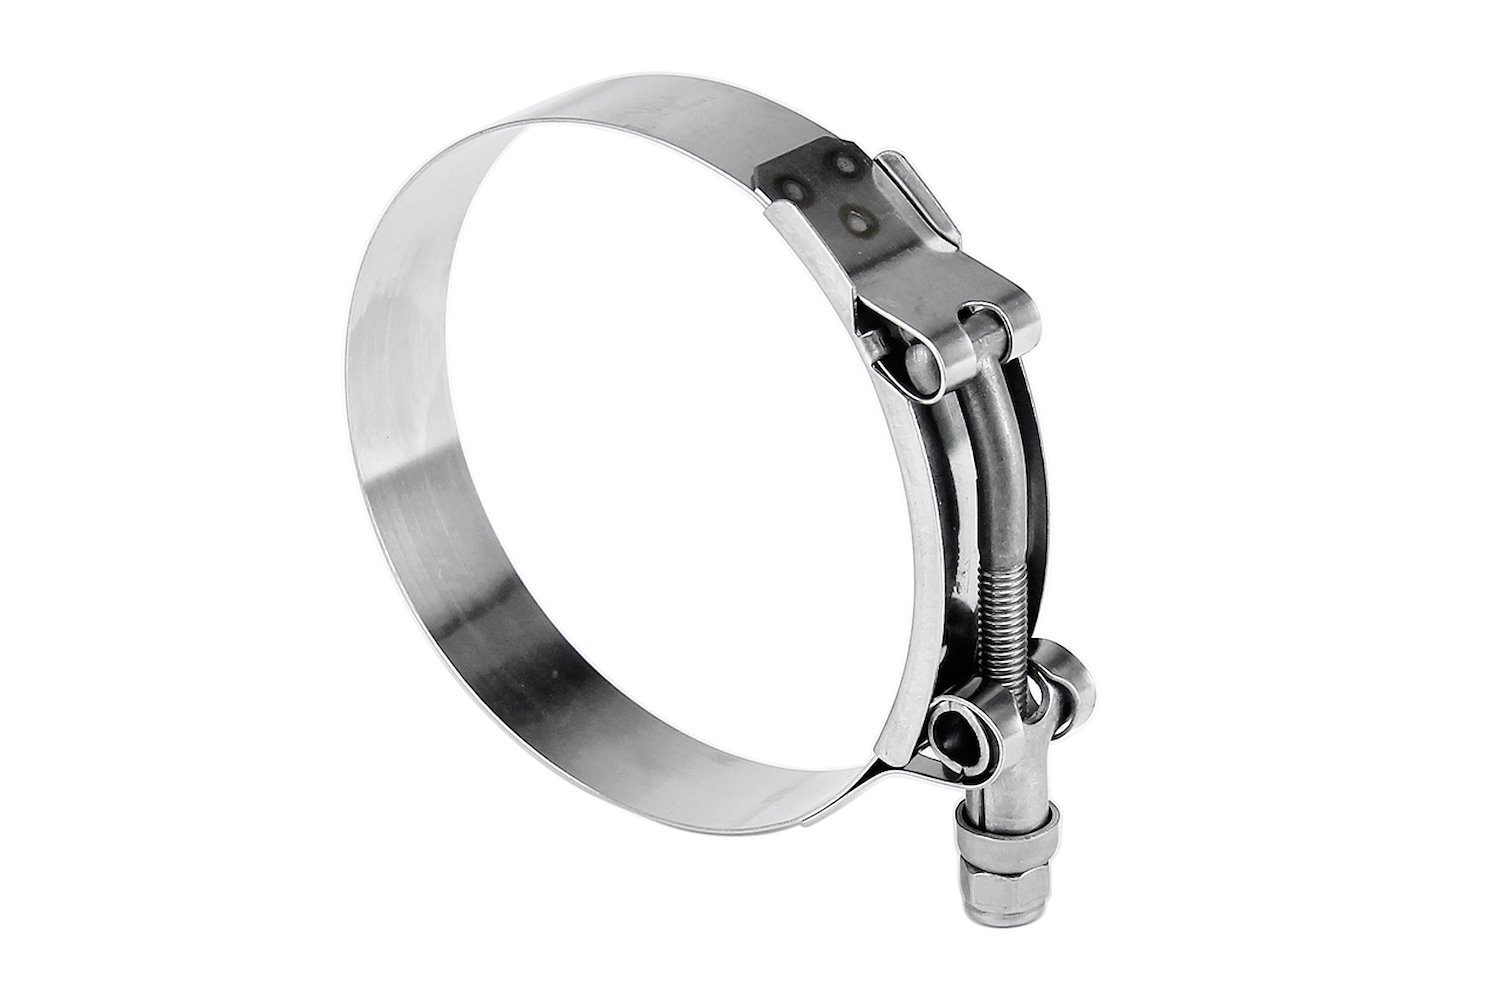 316-SSTC-79-87 100-Percent Marine Grade Stainless Steel T-Bolt Hose Clamp, Size #72, Range: 3.13 in.- 3.44 in.